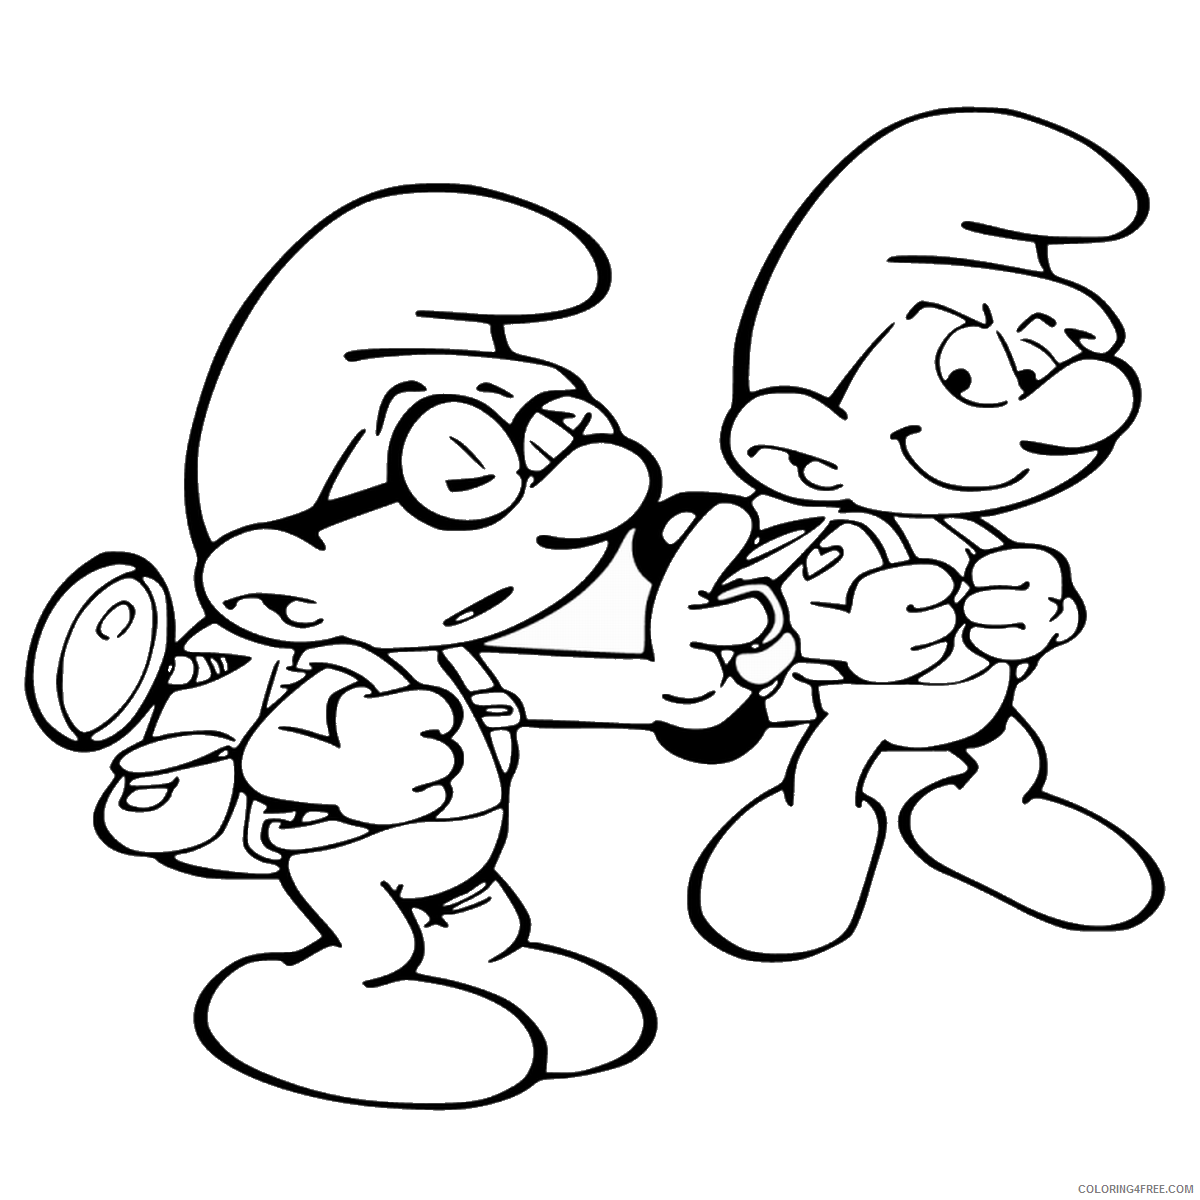 The Smurfs Coloring Pages TV Film smurfette 2020 09711 Coloring4free